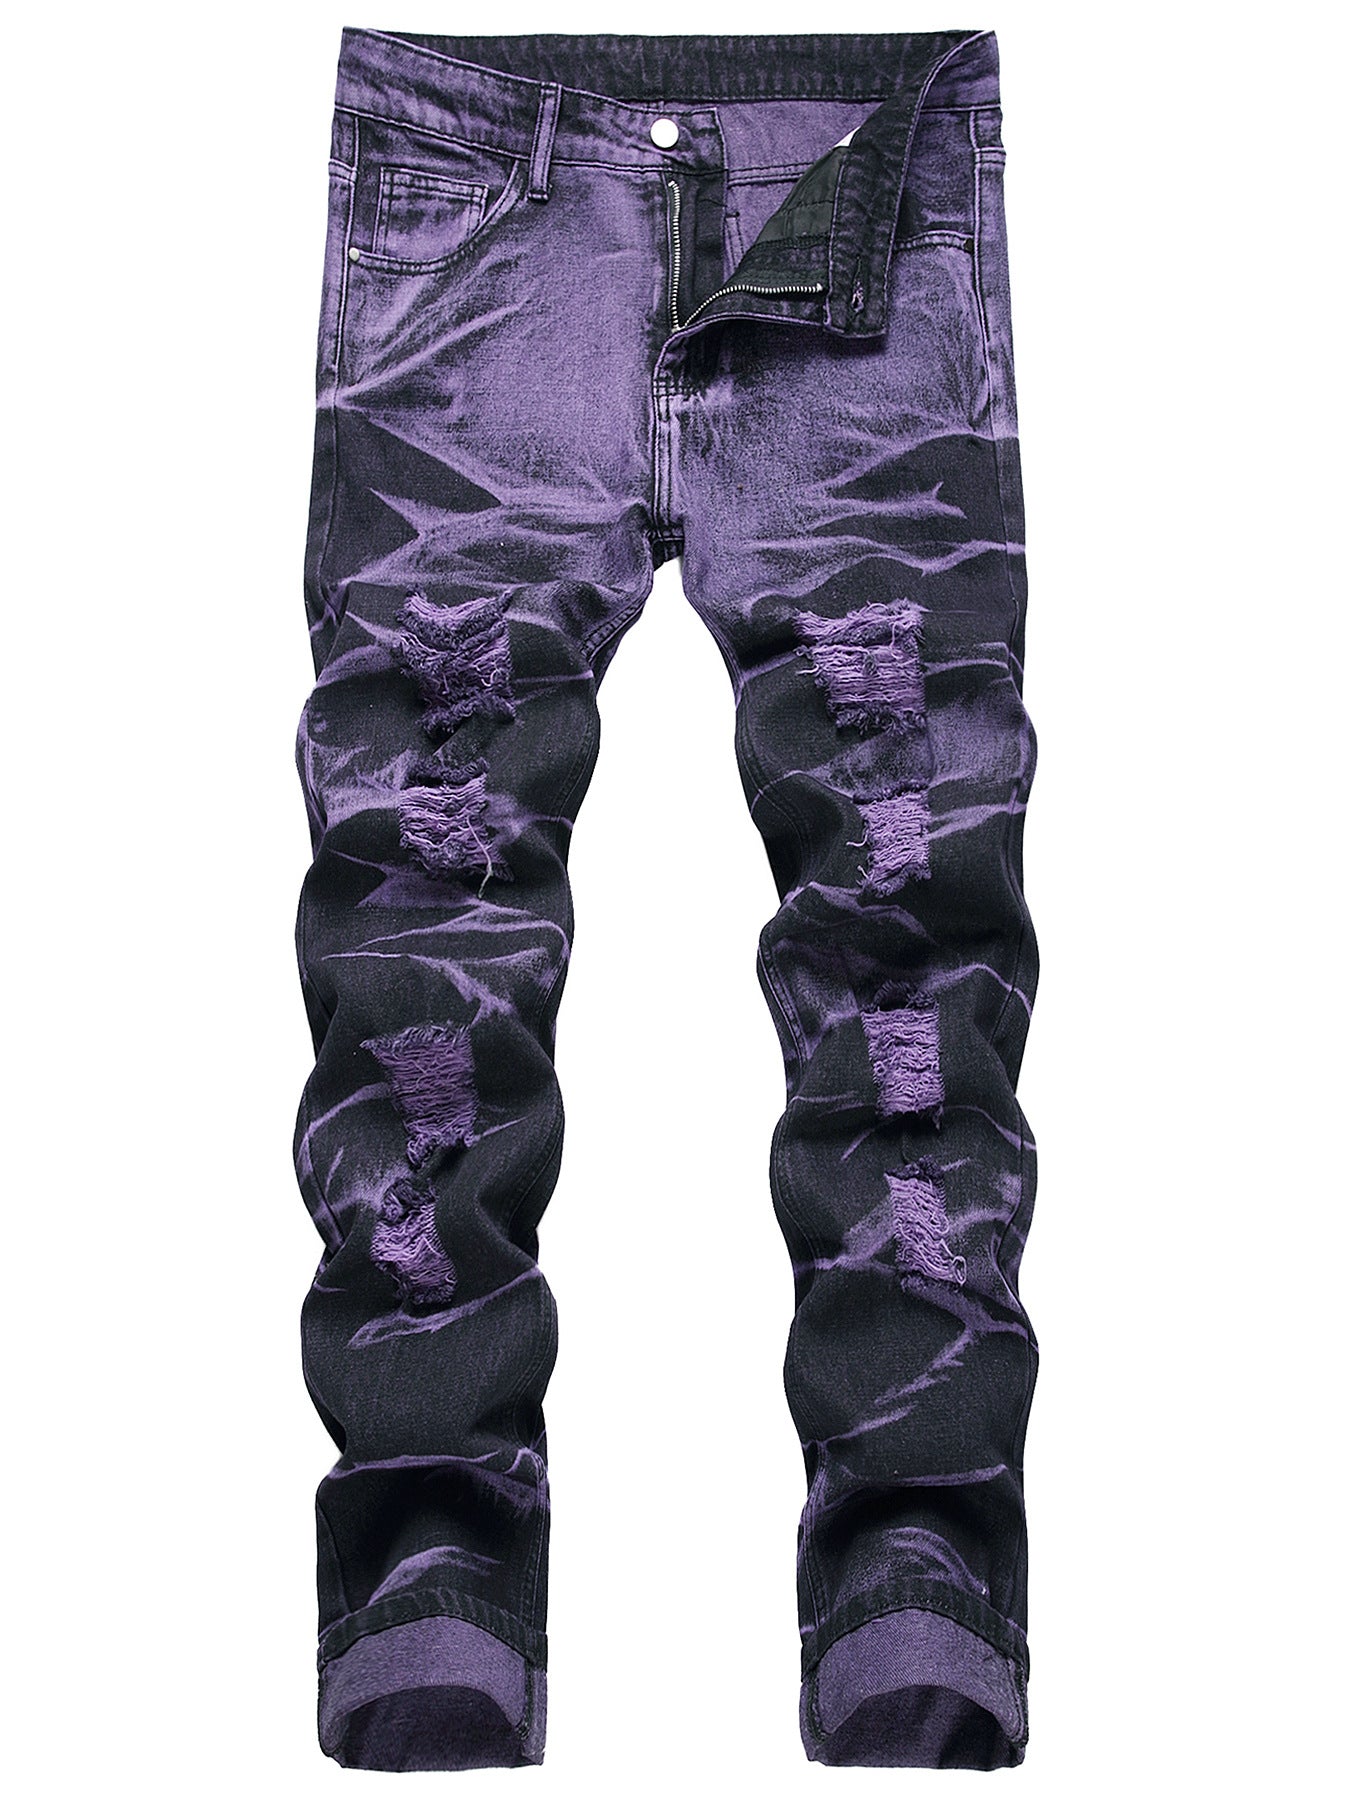 Get street cred with these Purple and Black Urban Men's Denim Trousers. These bold and edgy jeans will make you stand out in the urban fashion scene. With their unique purple and black design and distressed detailing, these high quality jeans are the perfect addition to any streetwear outfit. 